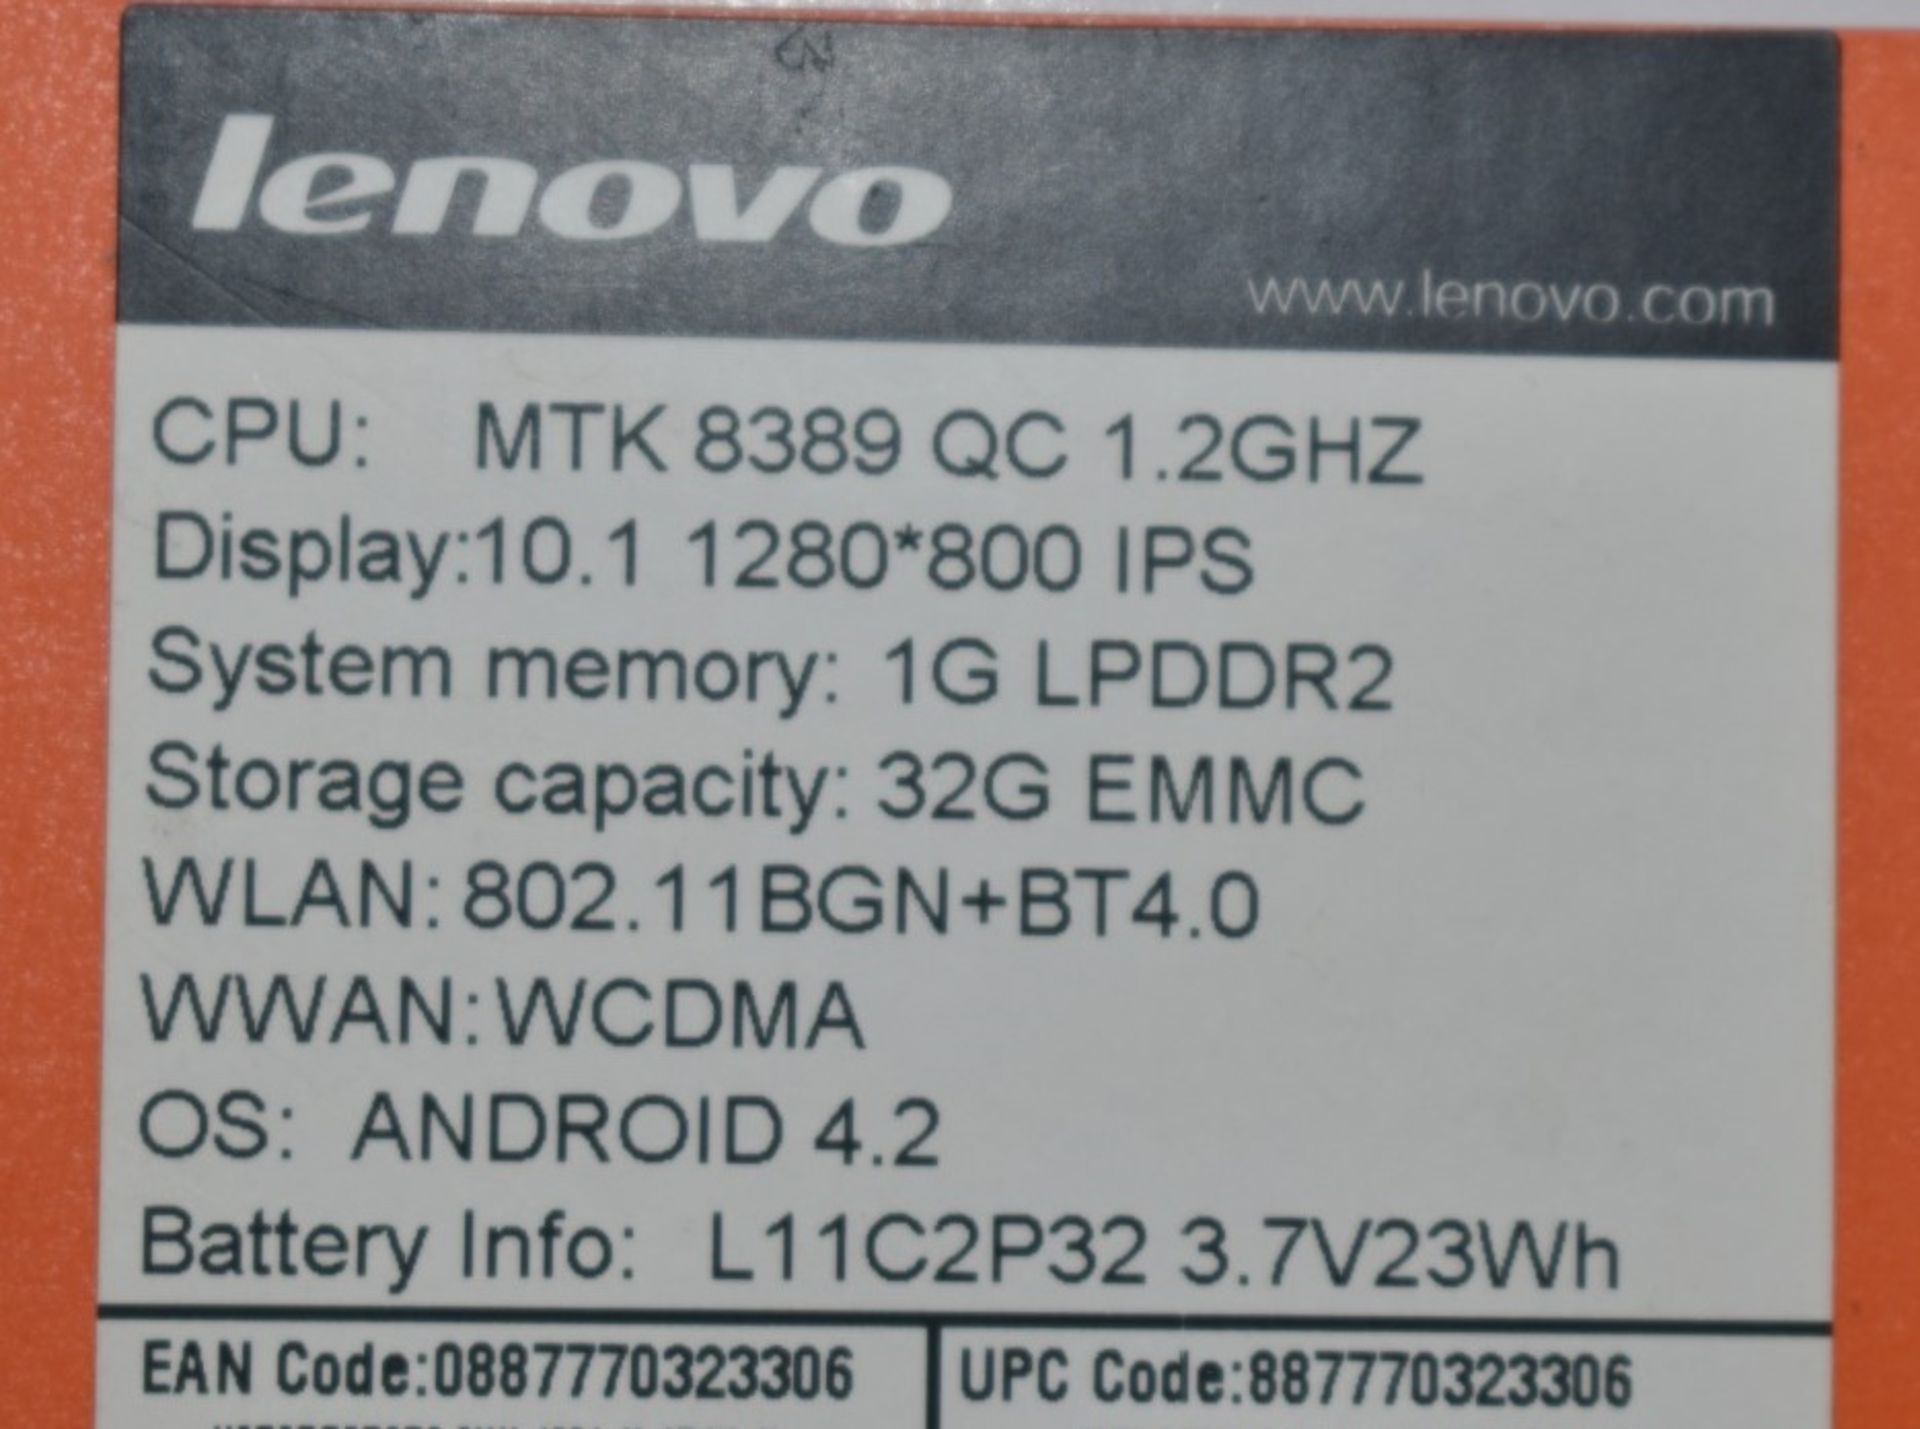 1 x Lenovo S6000 10.1inch Tablet Featuring a Quad Core 1.2GHz Processor, 1GB RAM, 32GB Storage - Image 5 of 5